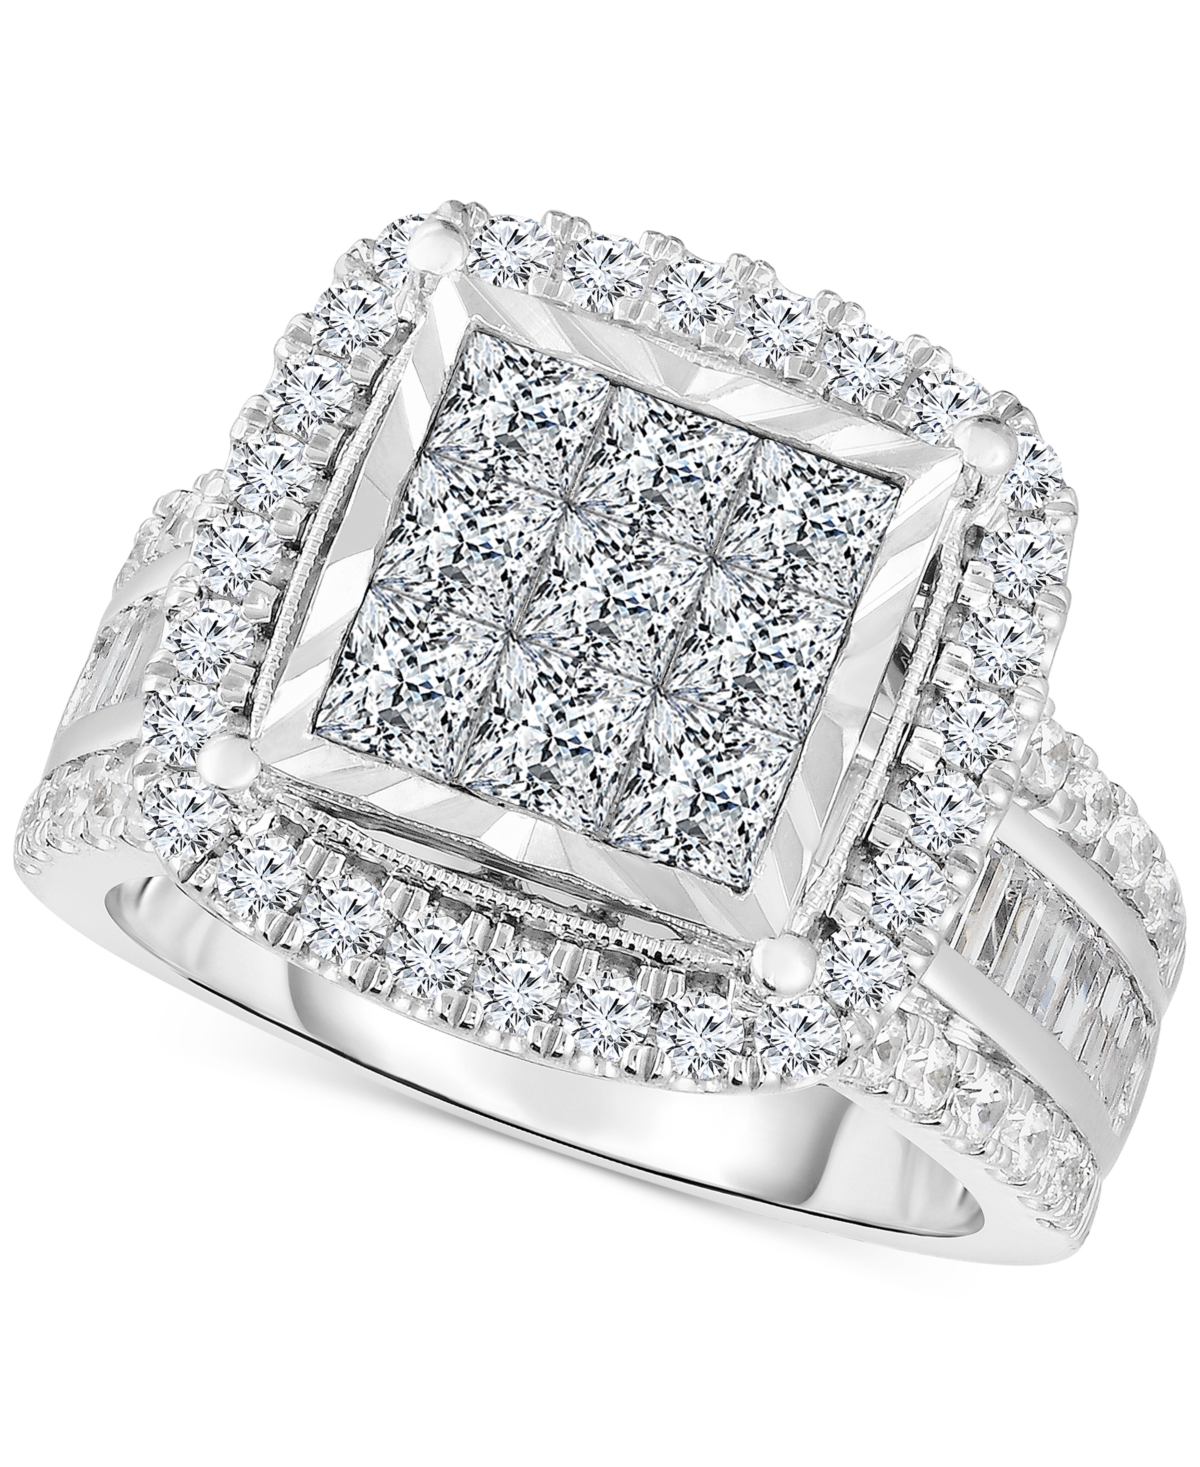 Diamond Halo Cluster Engagement Ring (3 ct. t.w.) in 10k White Gold - White Gold